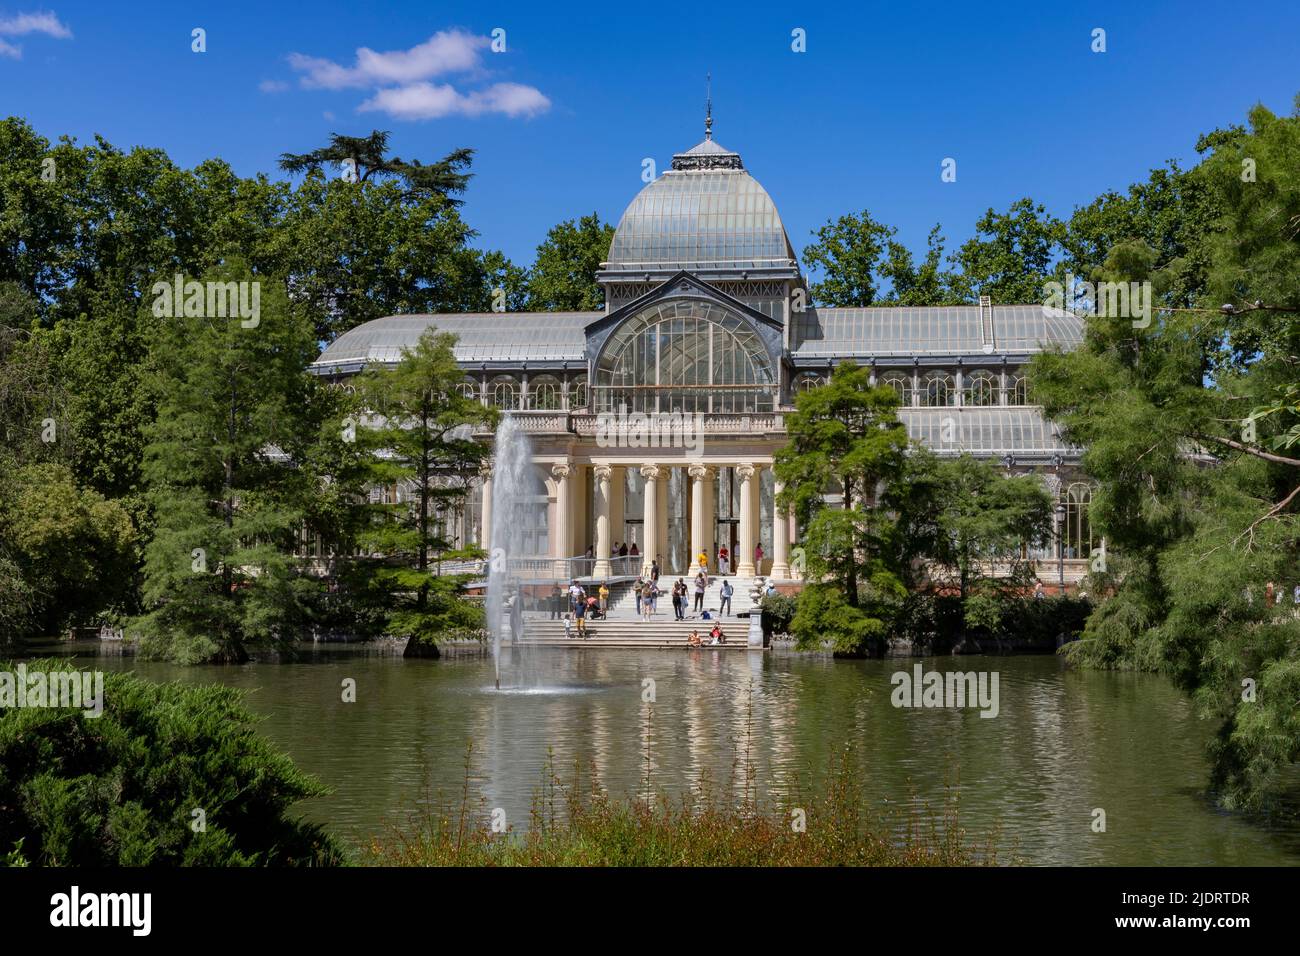 Crystal Palace. Building located in the Retiro Park in Madrid with its glass windows surrounded by trees and green vegetation on a sunny day Stock Photo